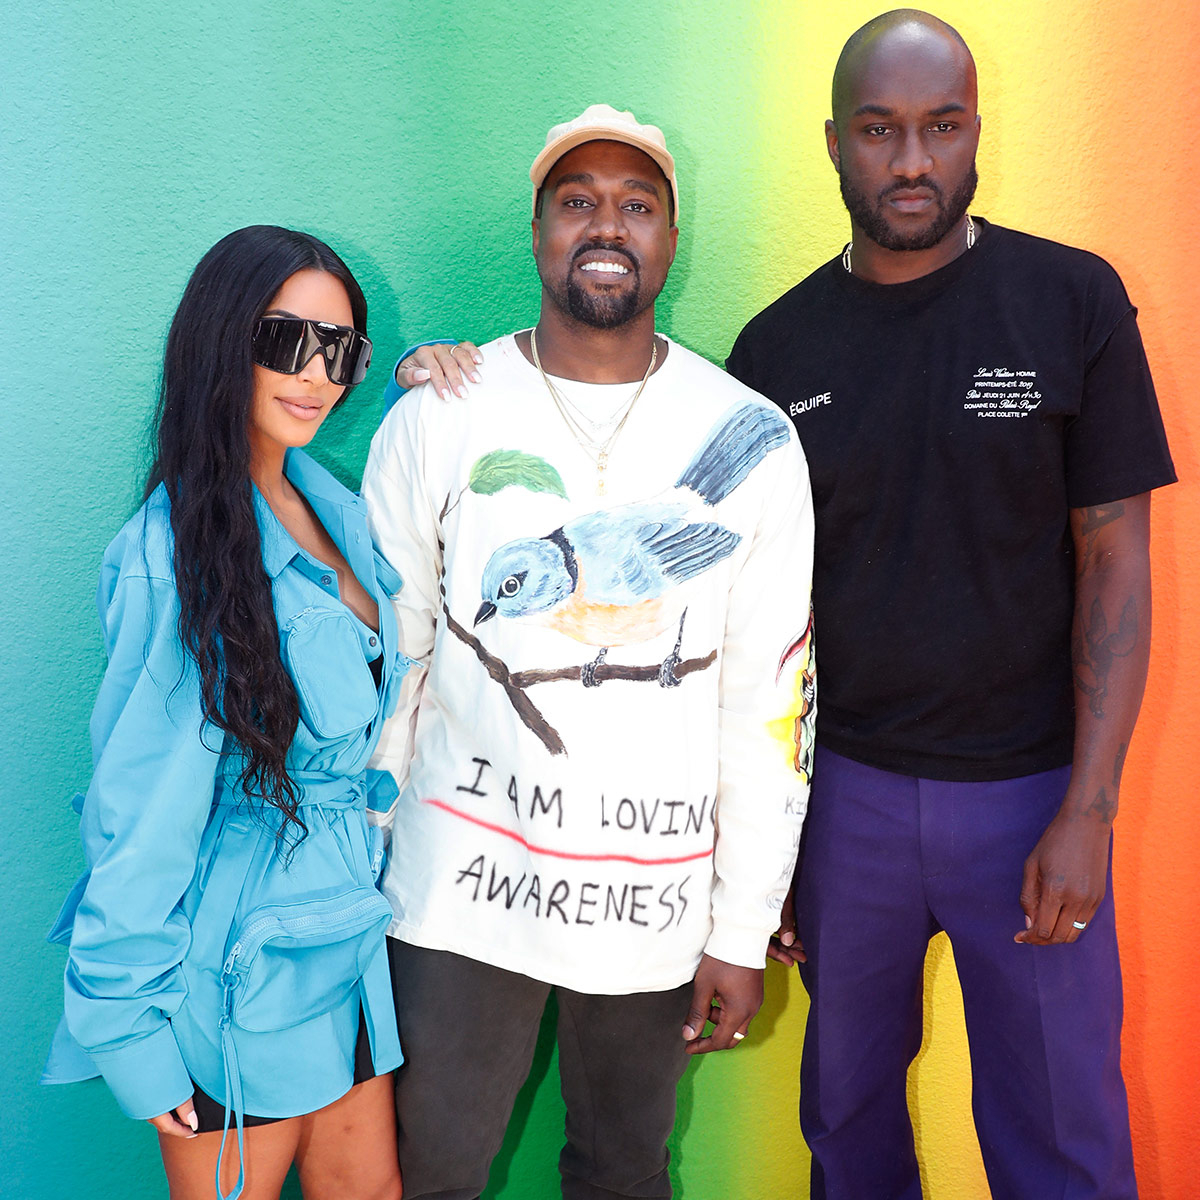 Photos Of Ye on X: This photo of Ye with Virgil and a quote from